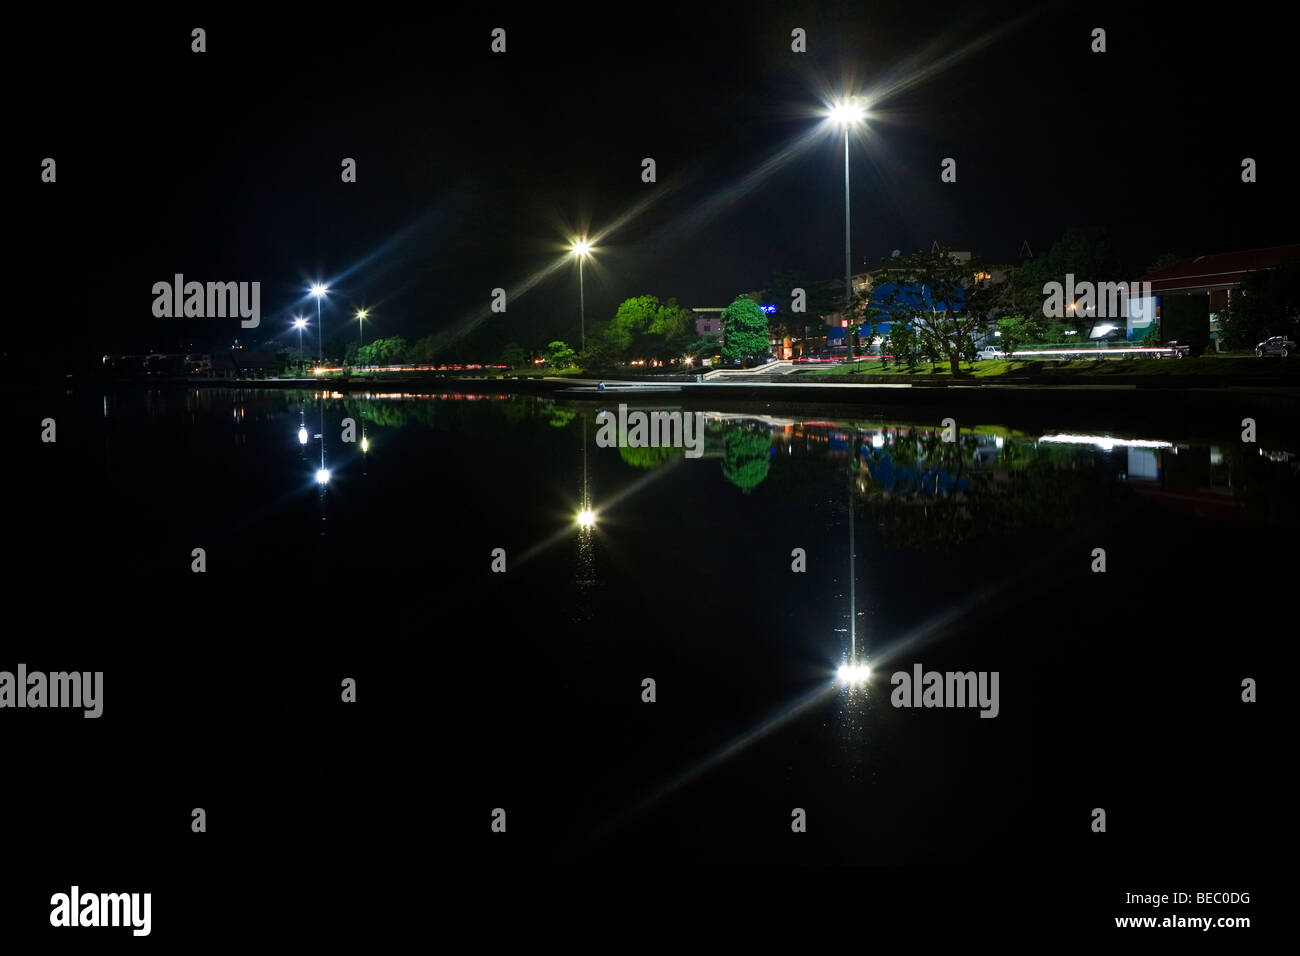 Streetlights and their reflection in a lake Stock Photo